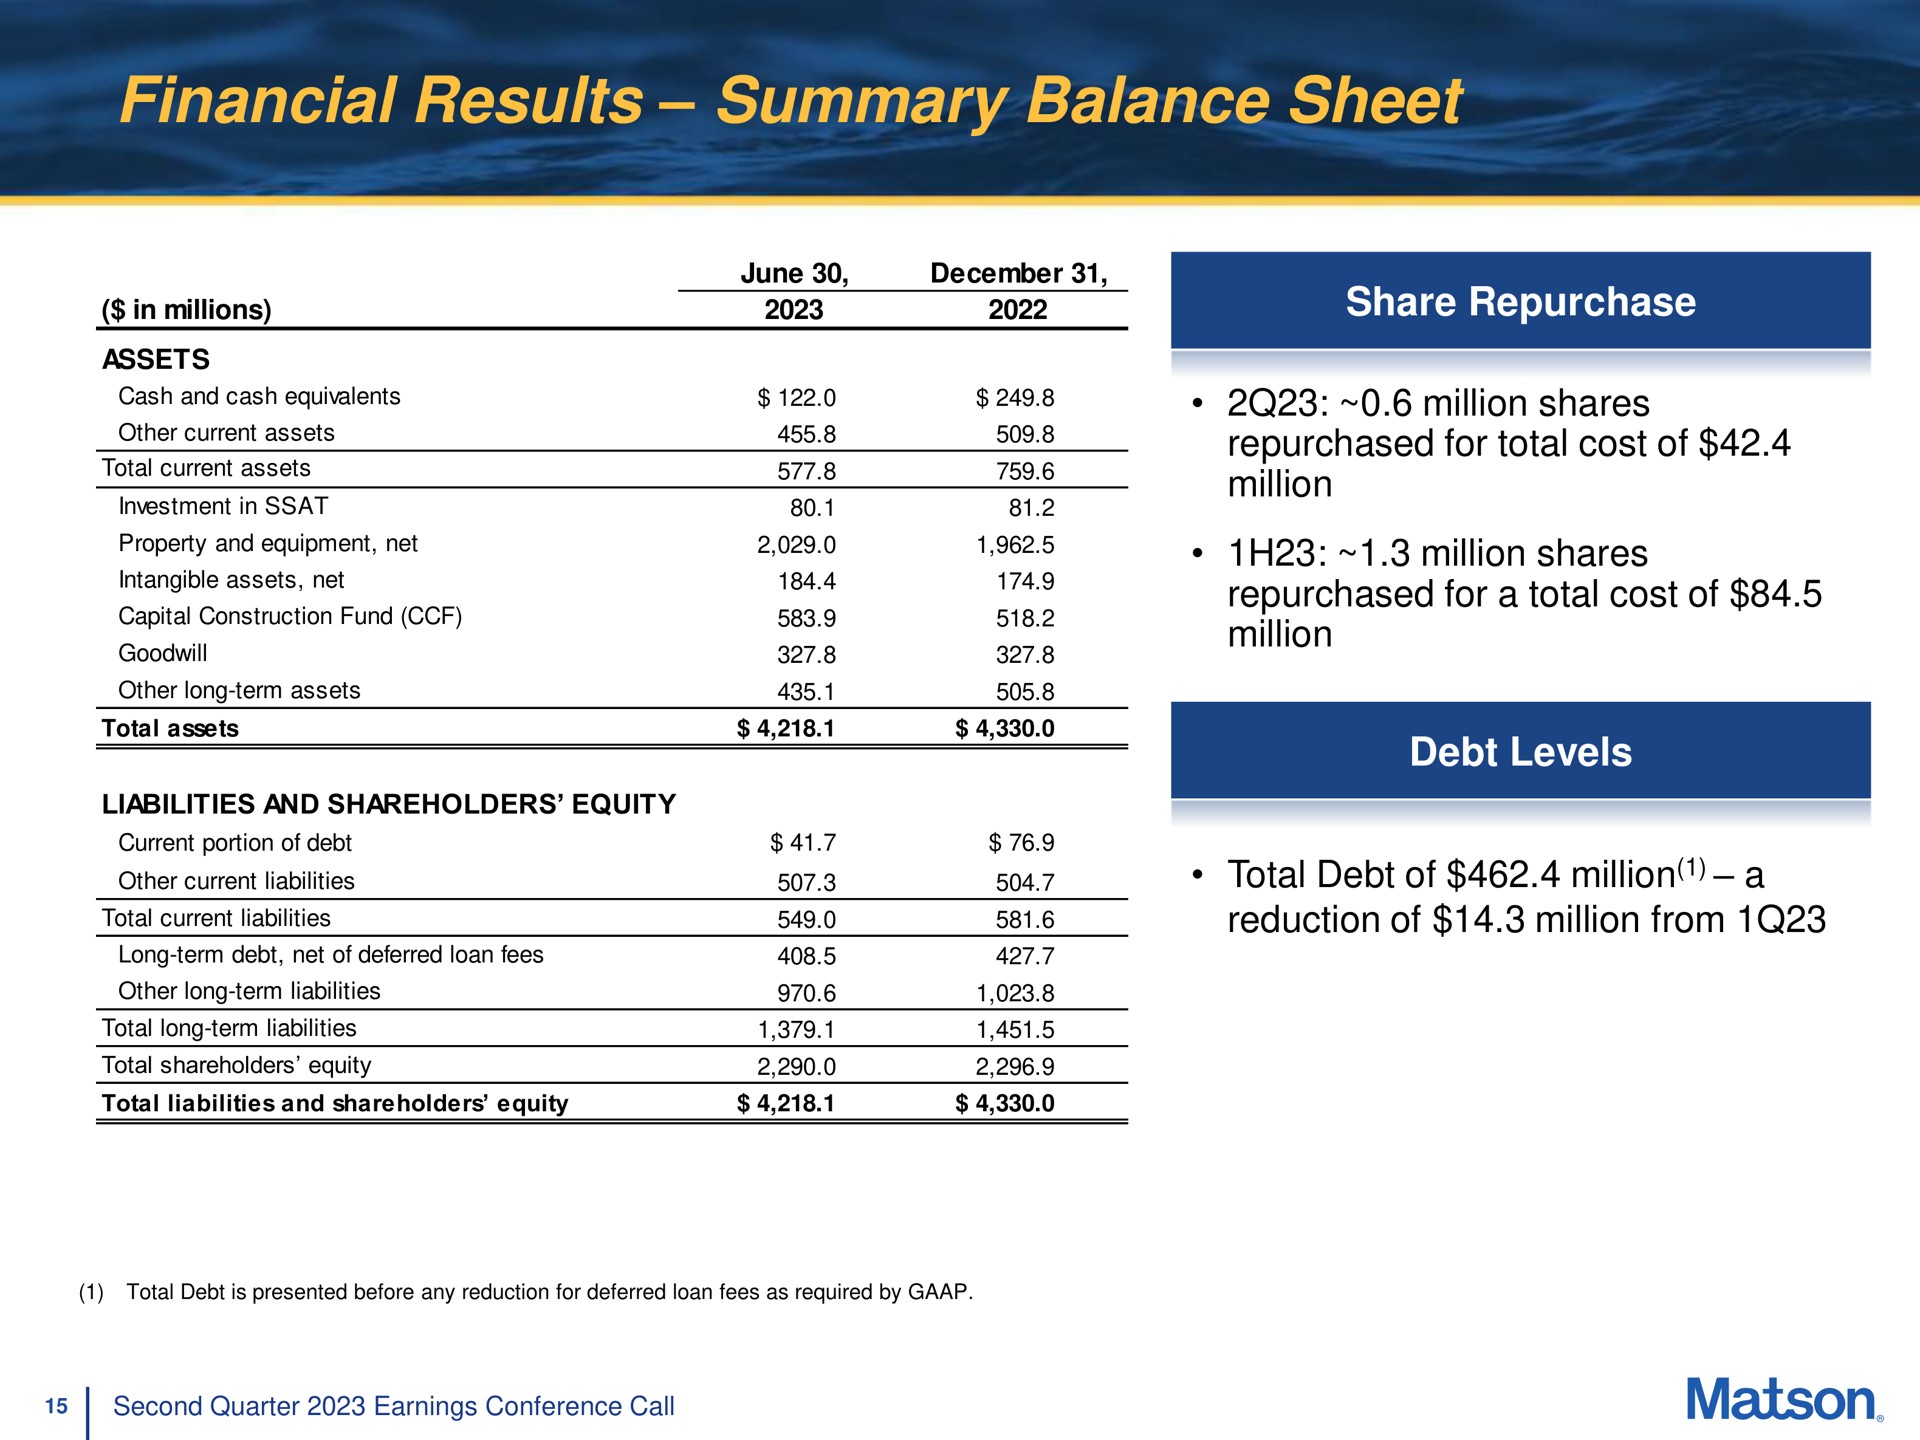 financial results summary balance sheet repurchased for total cost of | Matson